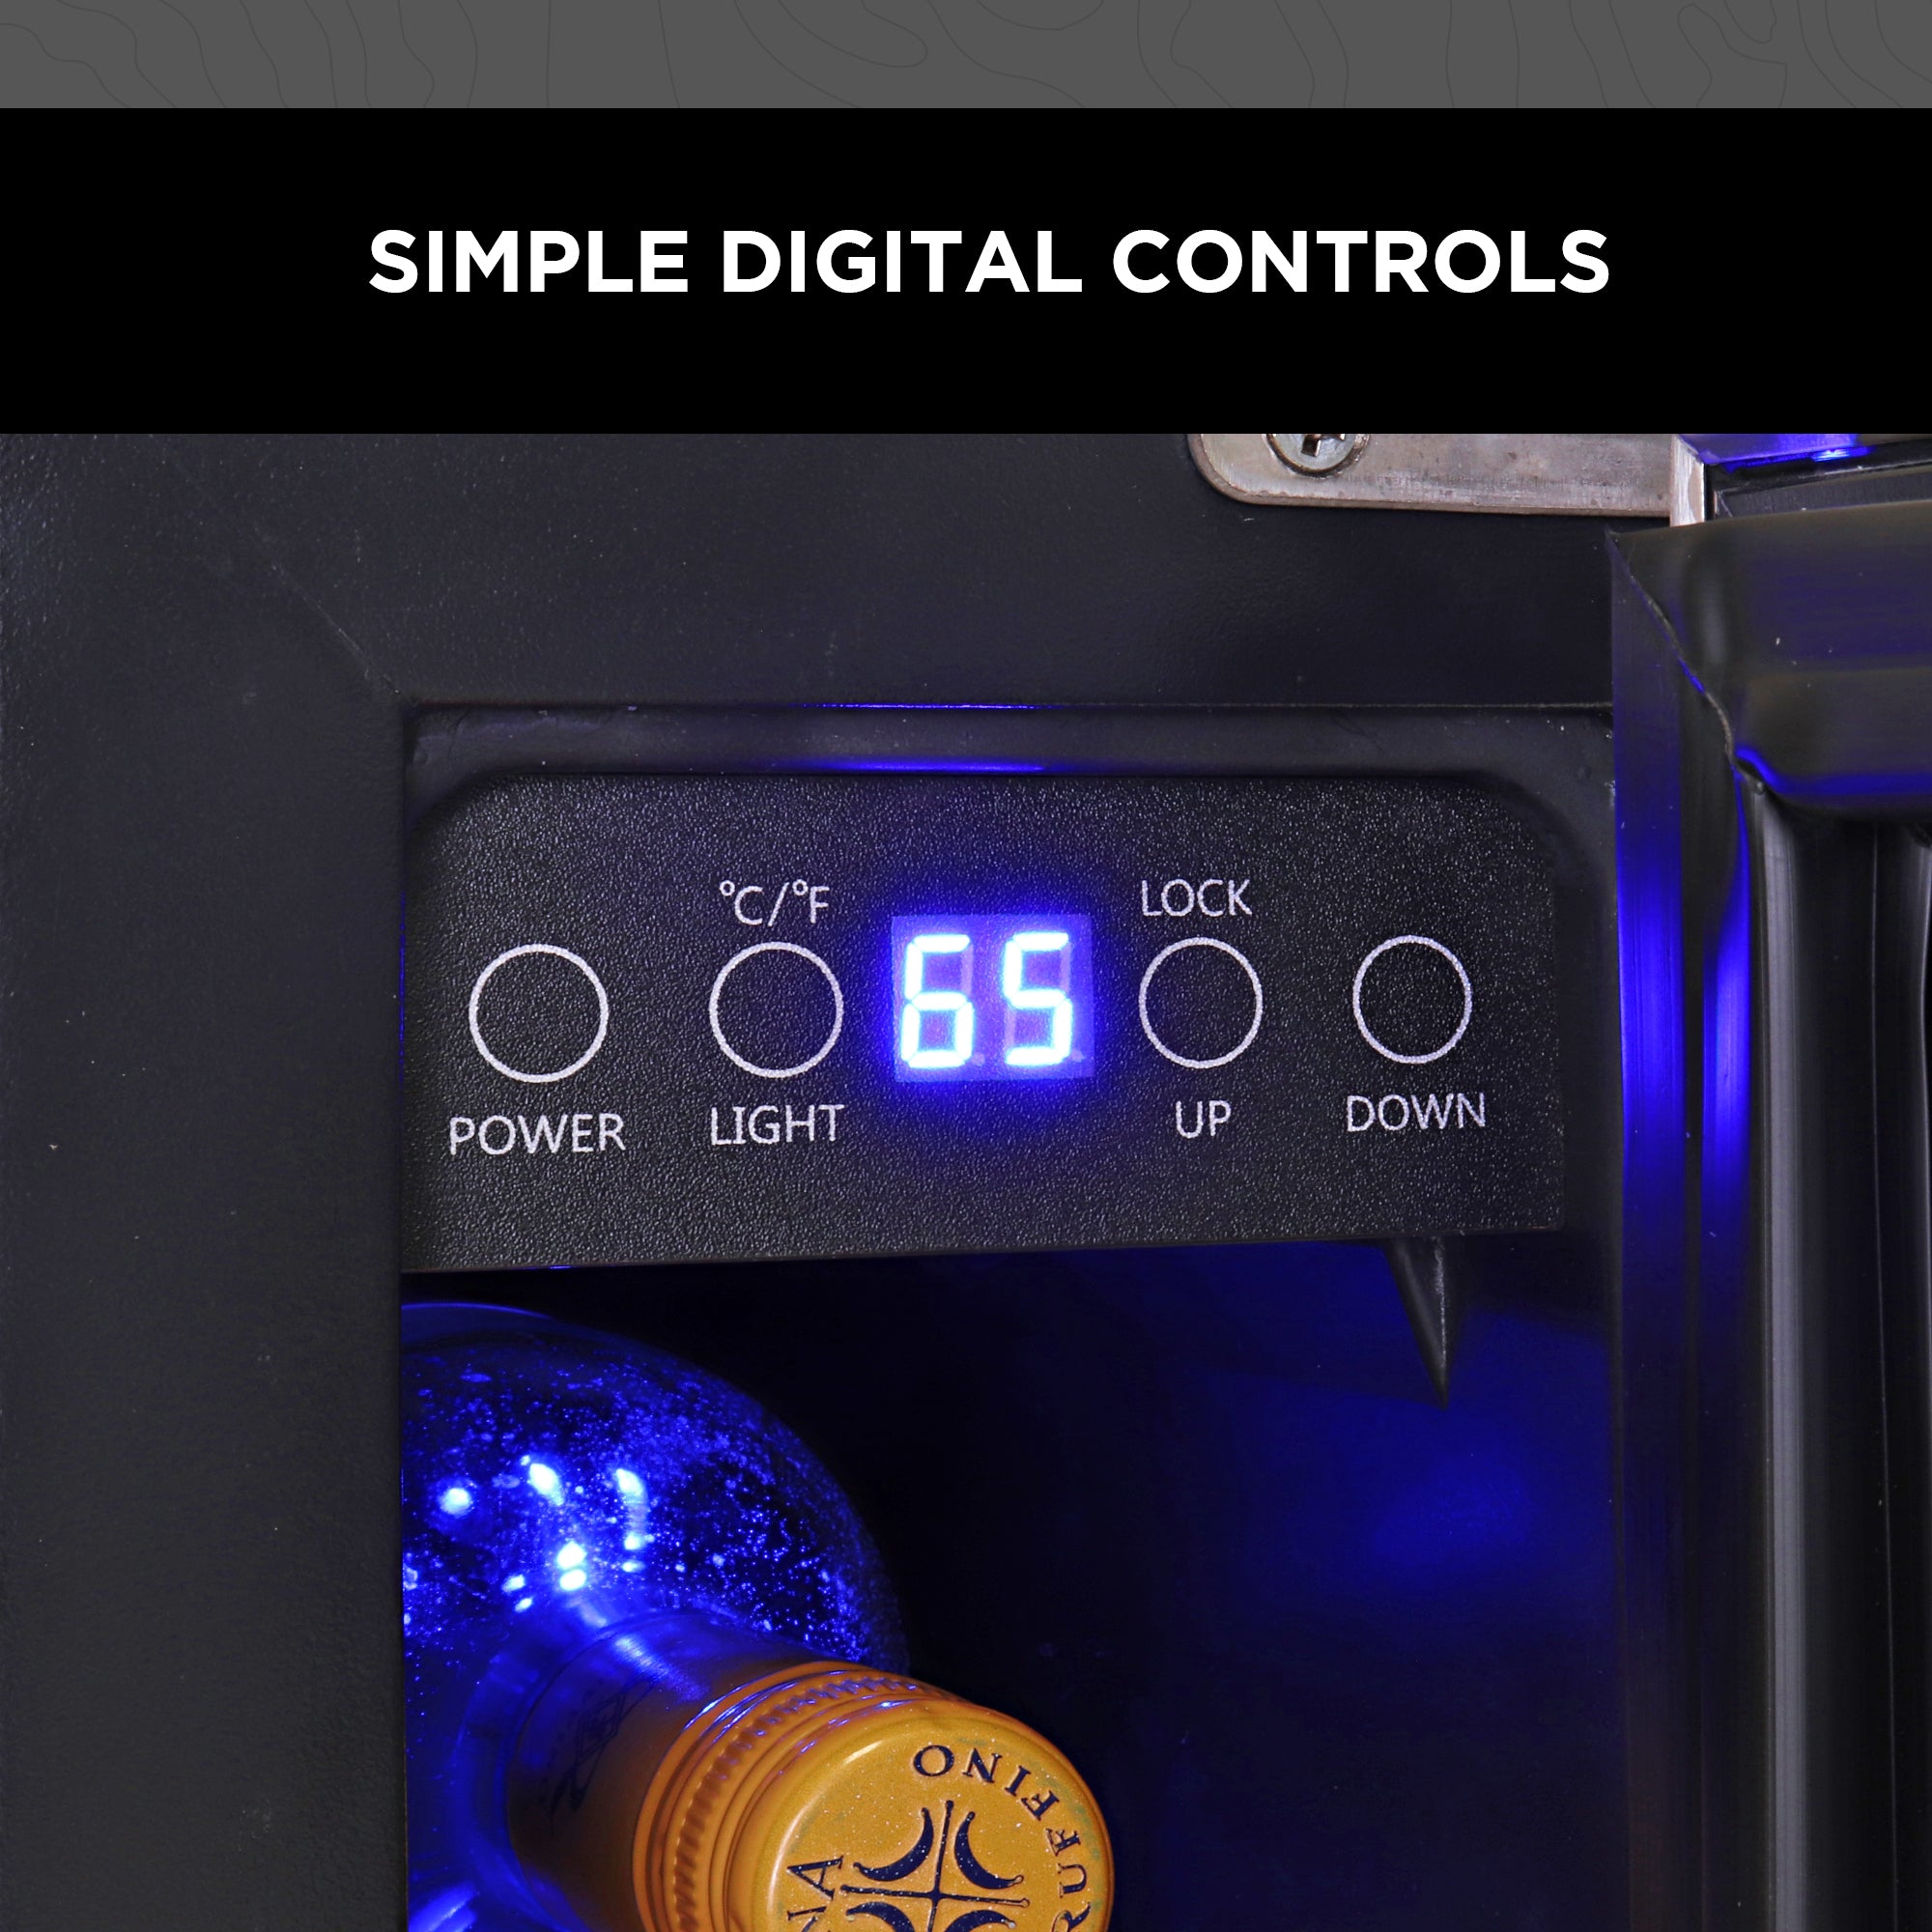 Closeup image of the control panel with a bottle of wine visible below. The LED display reads, “65” and a text overlay reads, “Simple digital controls”